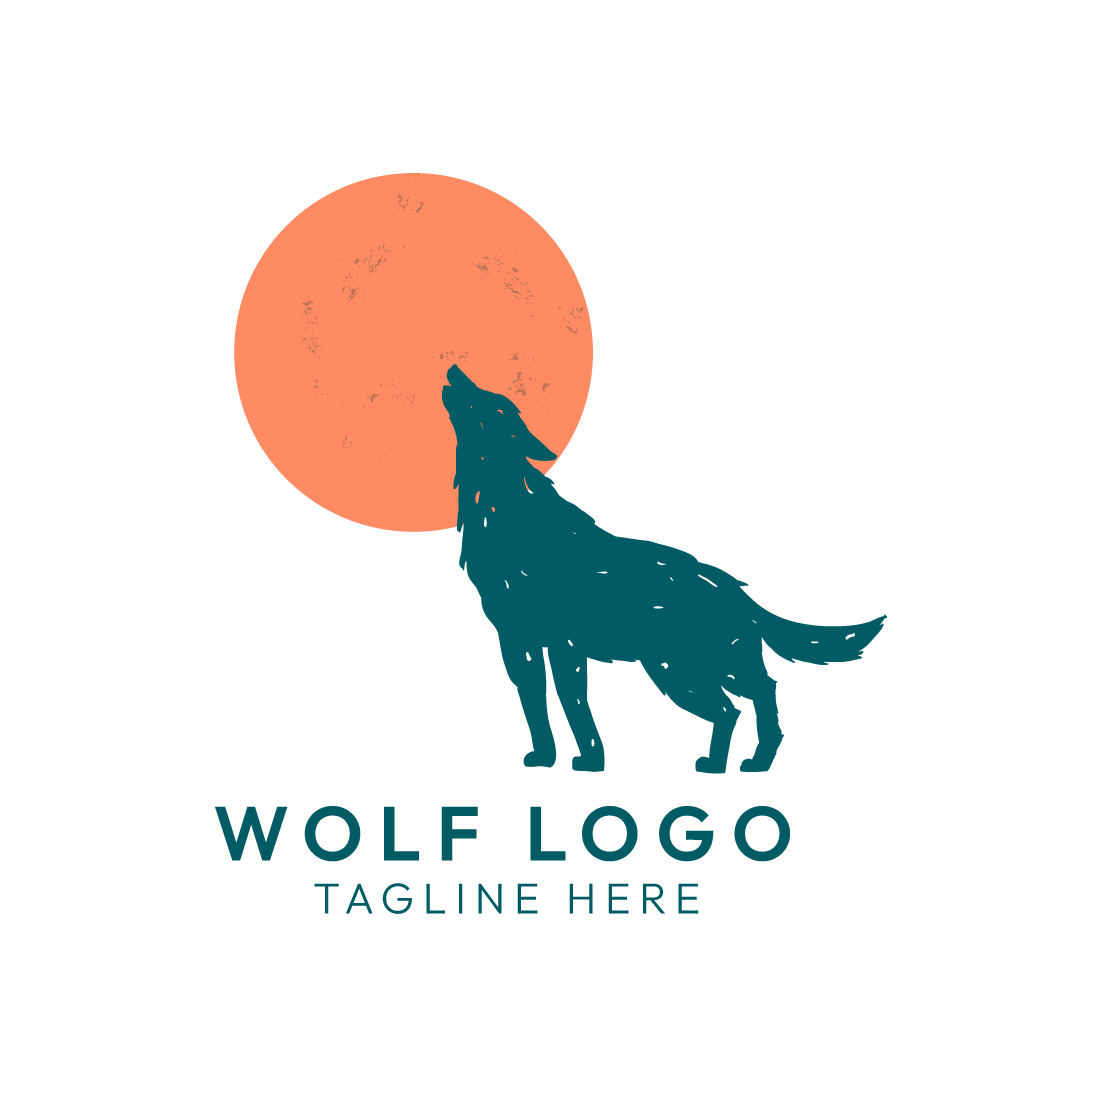 Exclusive Wolf Logo Design Bundle - Master Collection cover image.